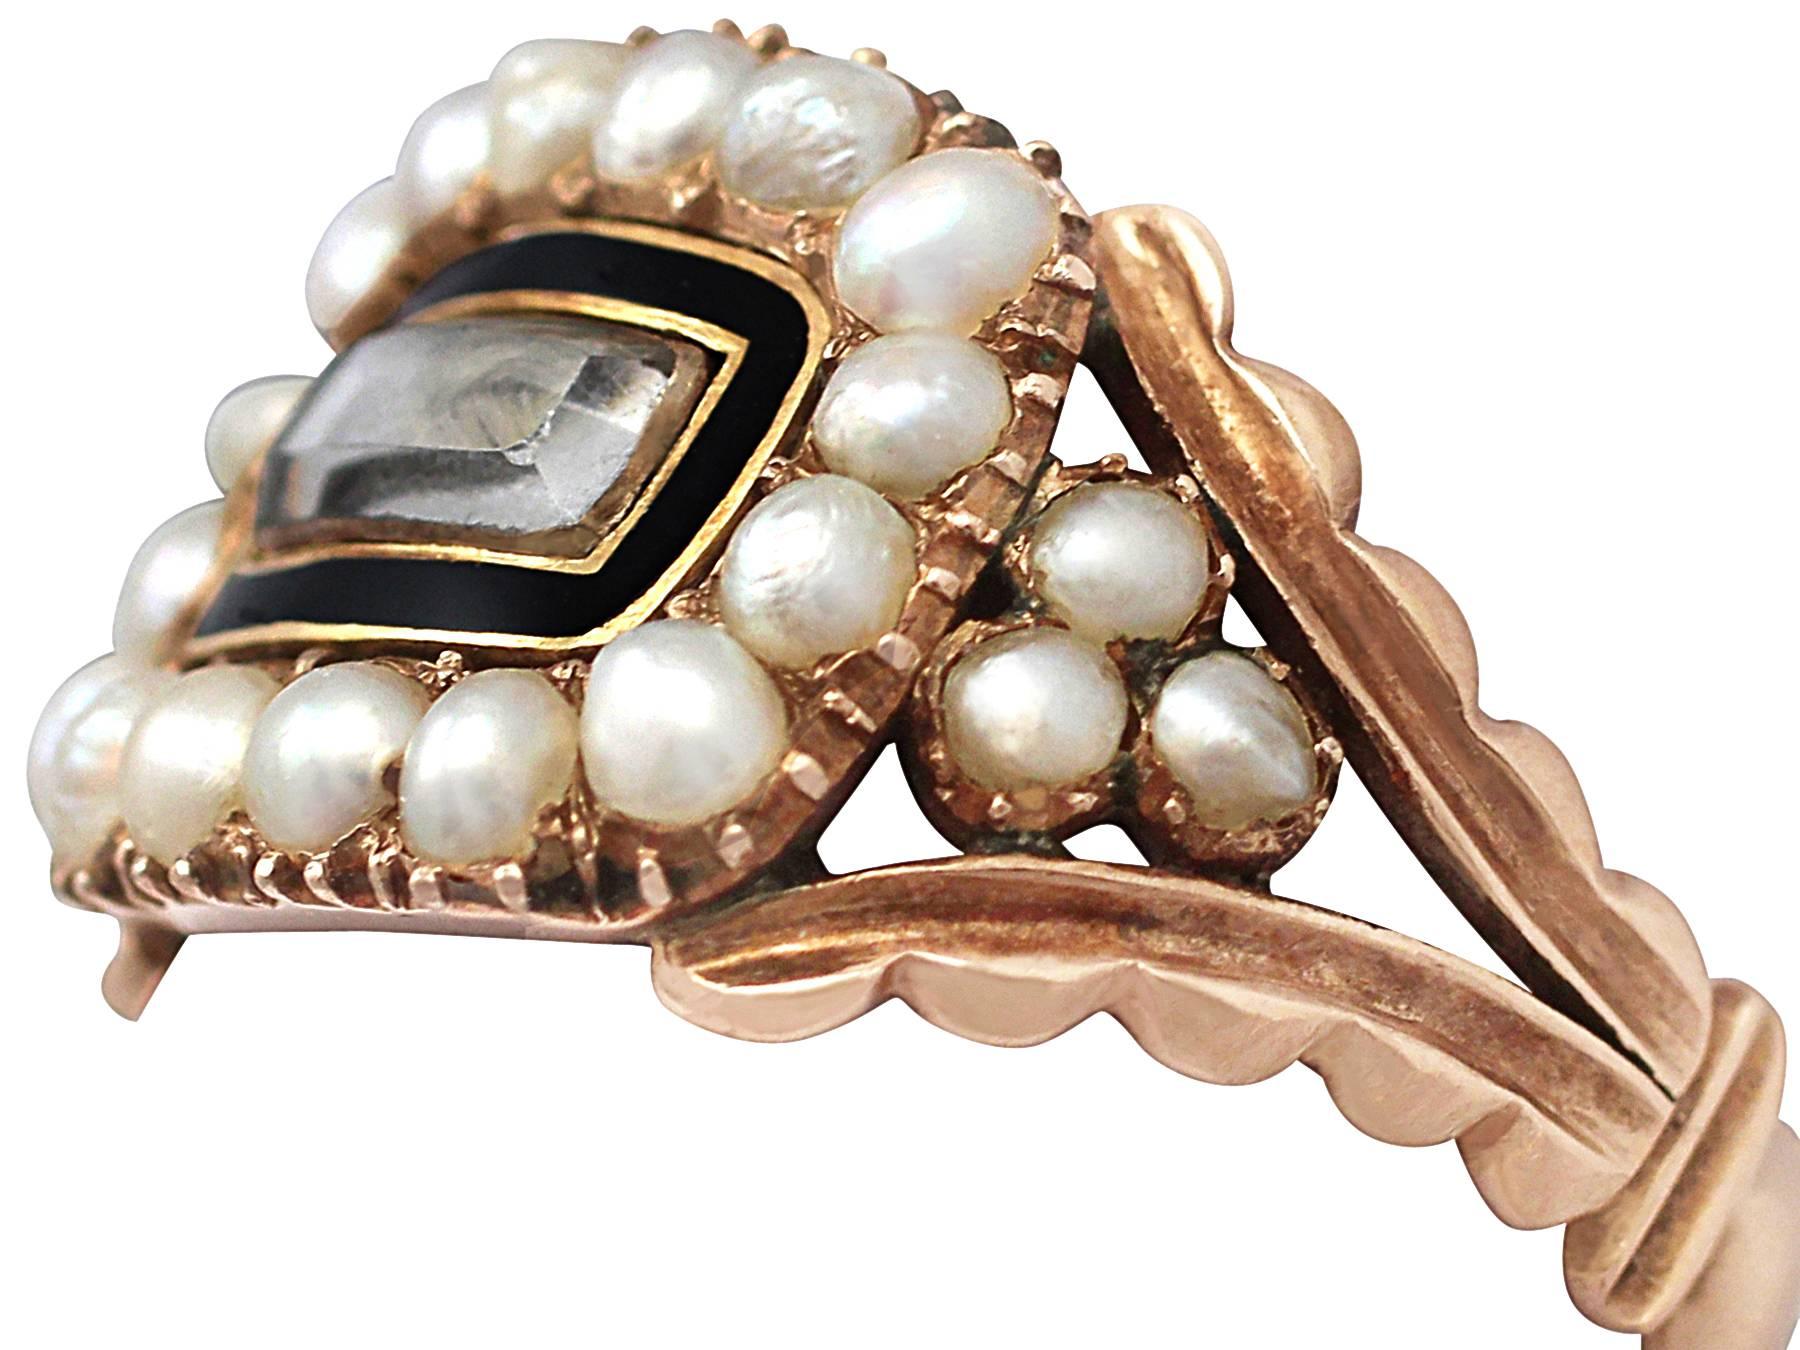 A fine and impressive antique Victorian pearl and enamel, 9 karat yellow gold mourning ring; part of our antique jewelry and estate jewelry collections

This fine Victorian pearl ring has been crafted in 9k yellow gold.

The low profile frame